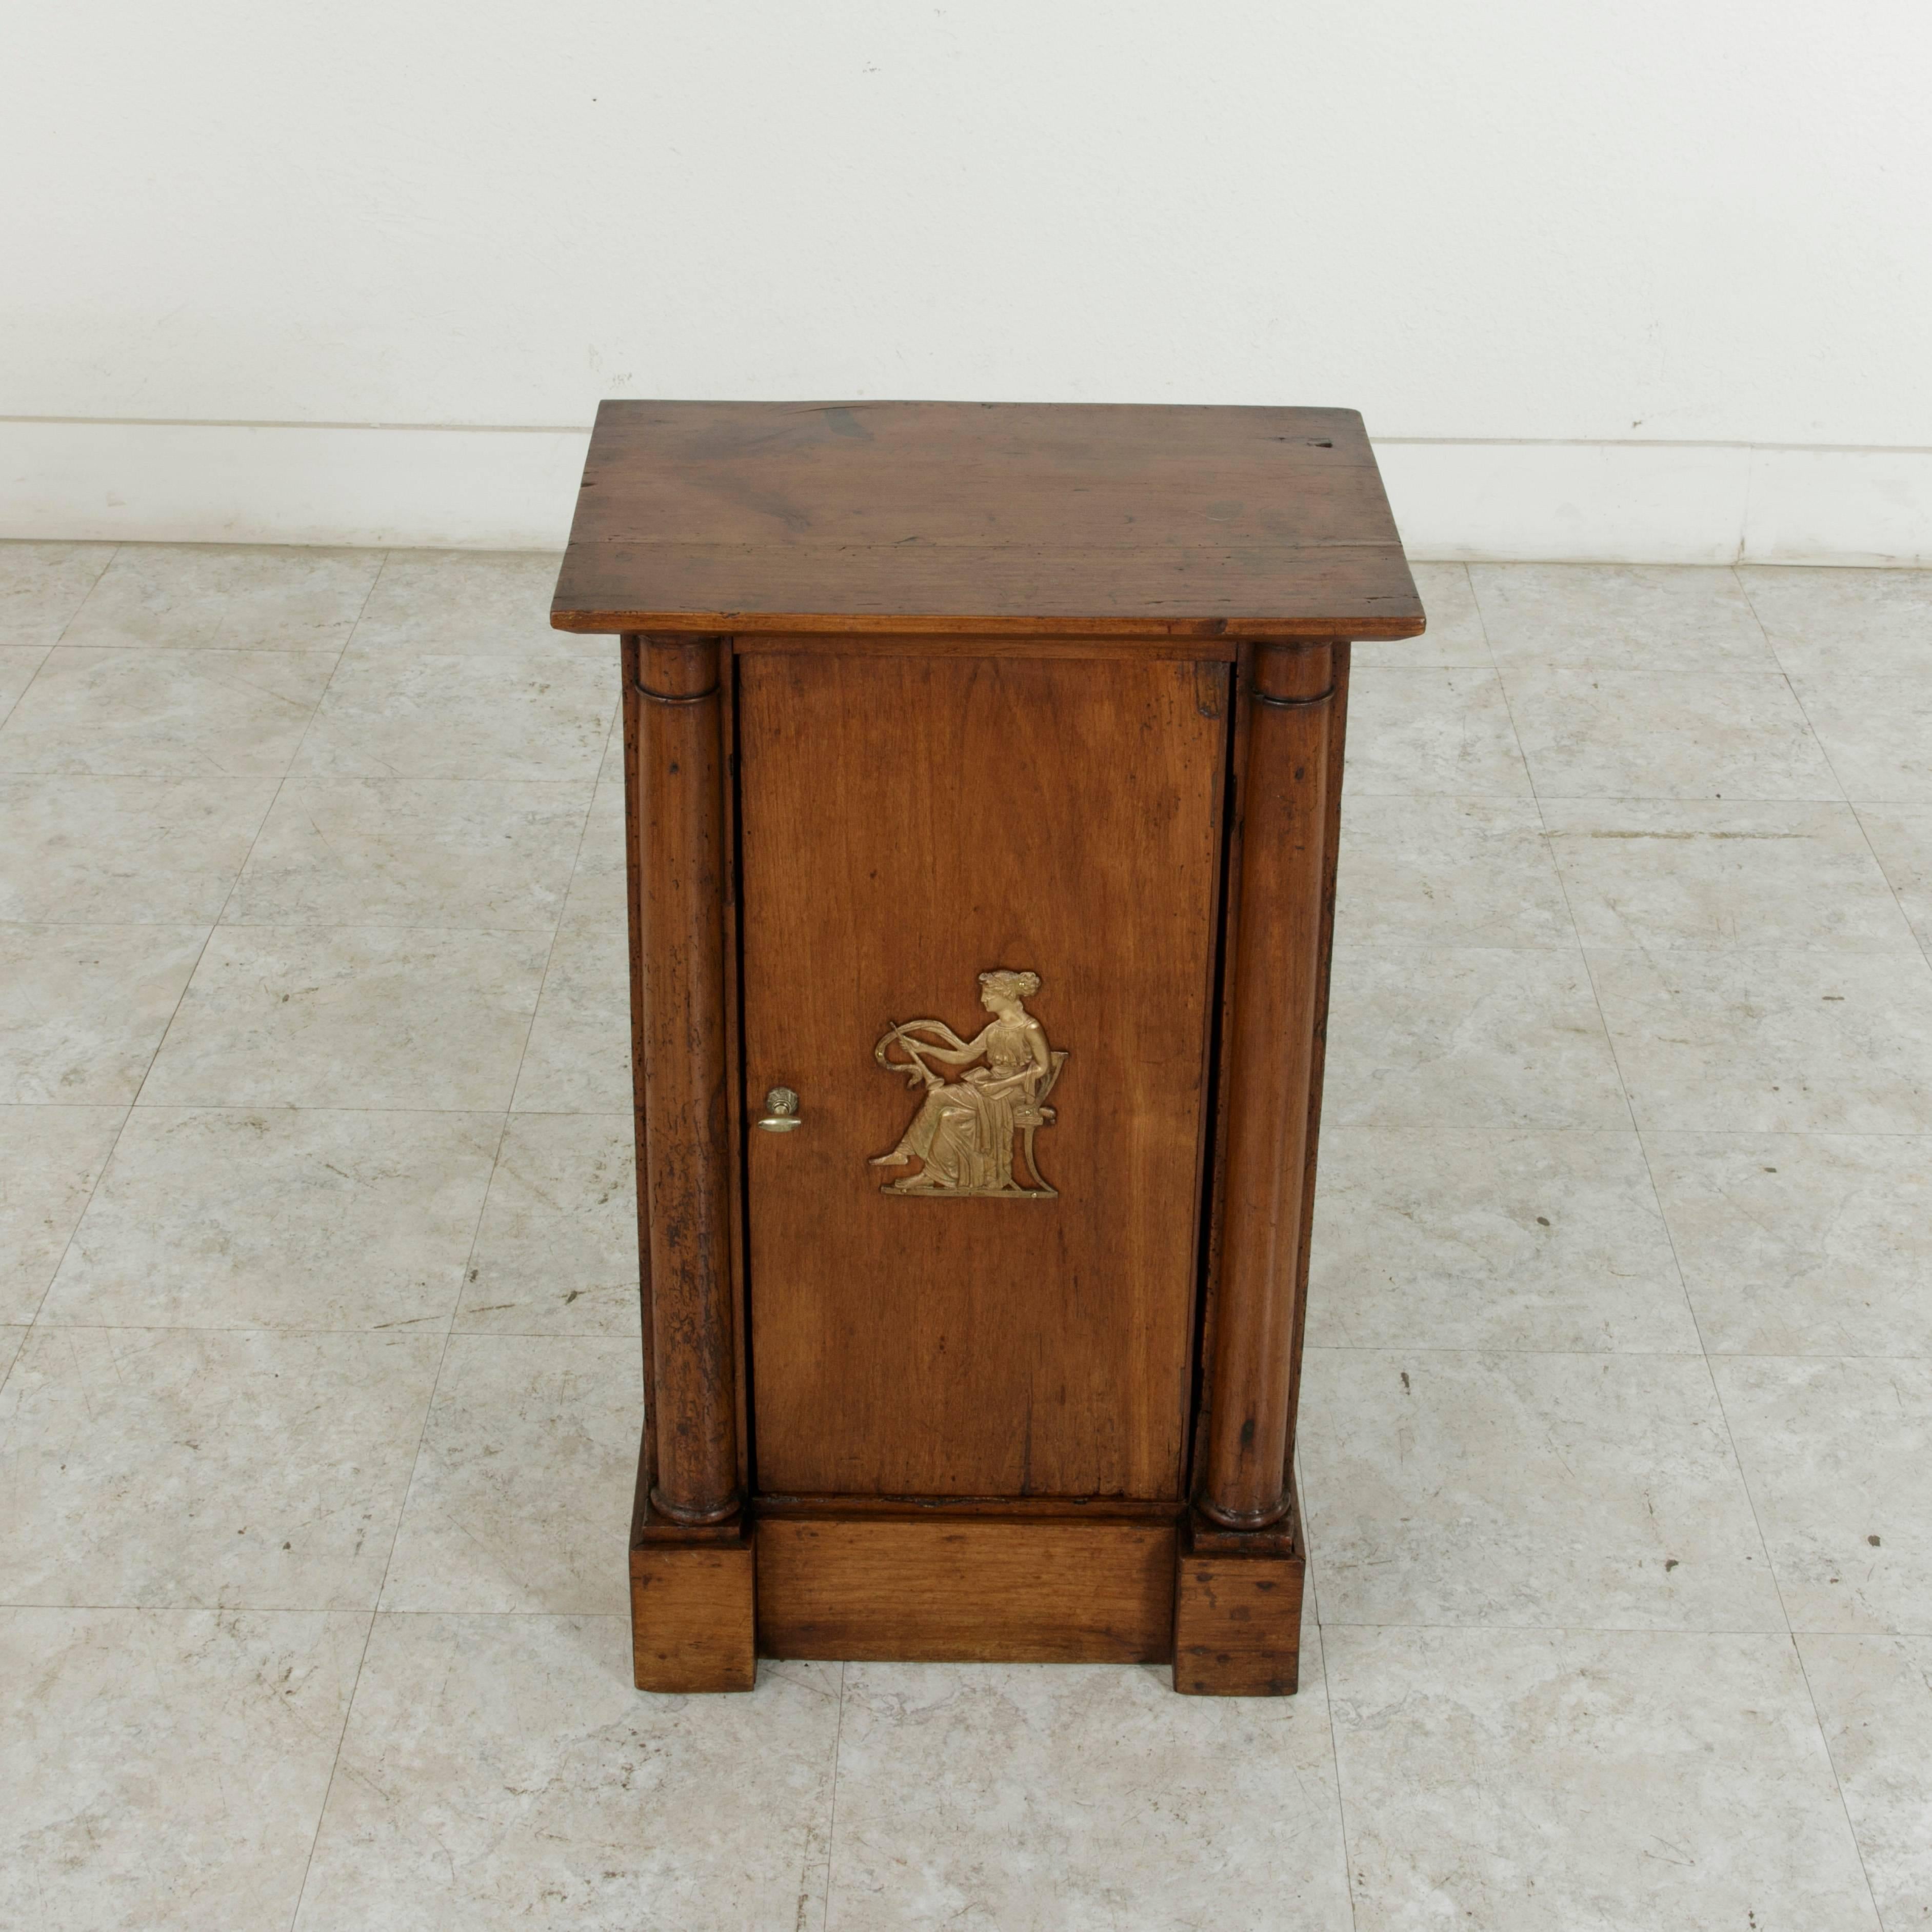 This French Empire period walnut cabinet or nightstand features two half column supports that flank the single door. A brass ornamentation of a classical Greek female figure sitting in a chair adorns the door. In her right hand she holds a flute